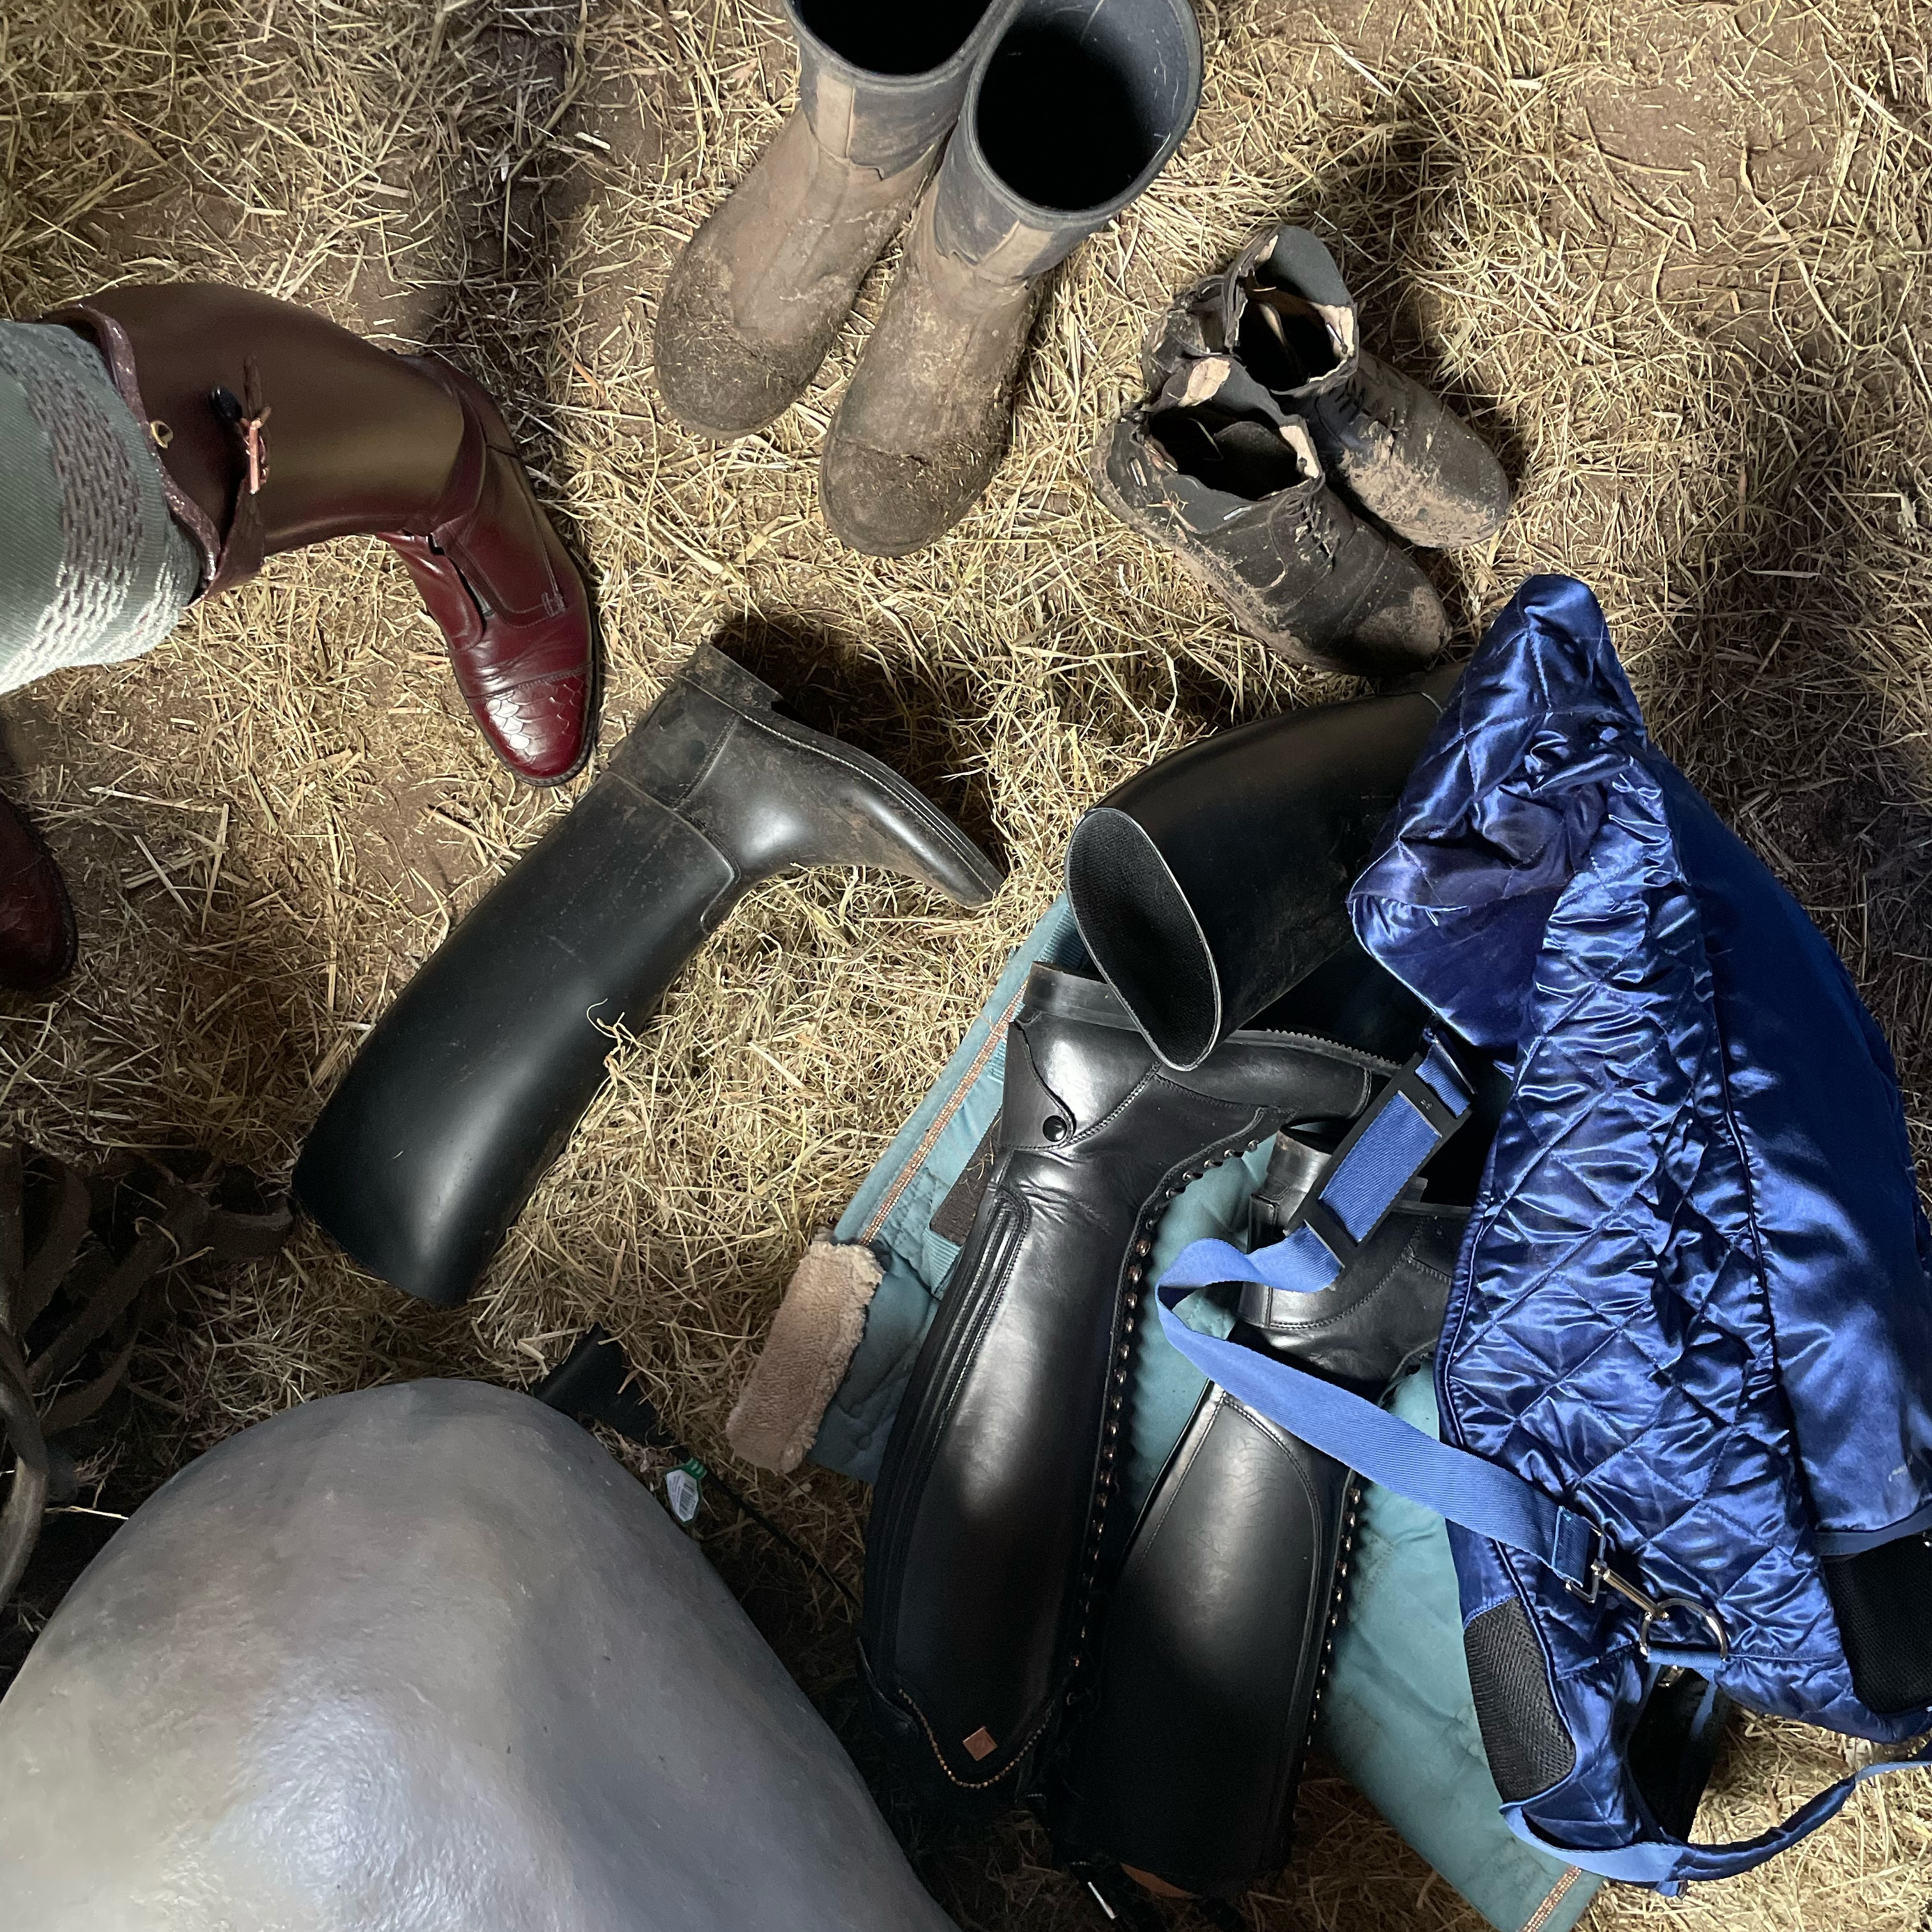 My shed after I went live 🌈Enjoy the mess 👸🏼✨

#ridingboots #horsegirls #leatherboots #rubberboots #ootd #equestrianmodel #equestrian #equestrianboots #hunterboots #aigleboots #ridingmistress #reitstiefel #reitherrin #equestrianlifestyle